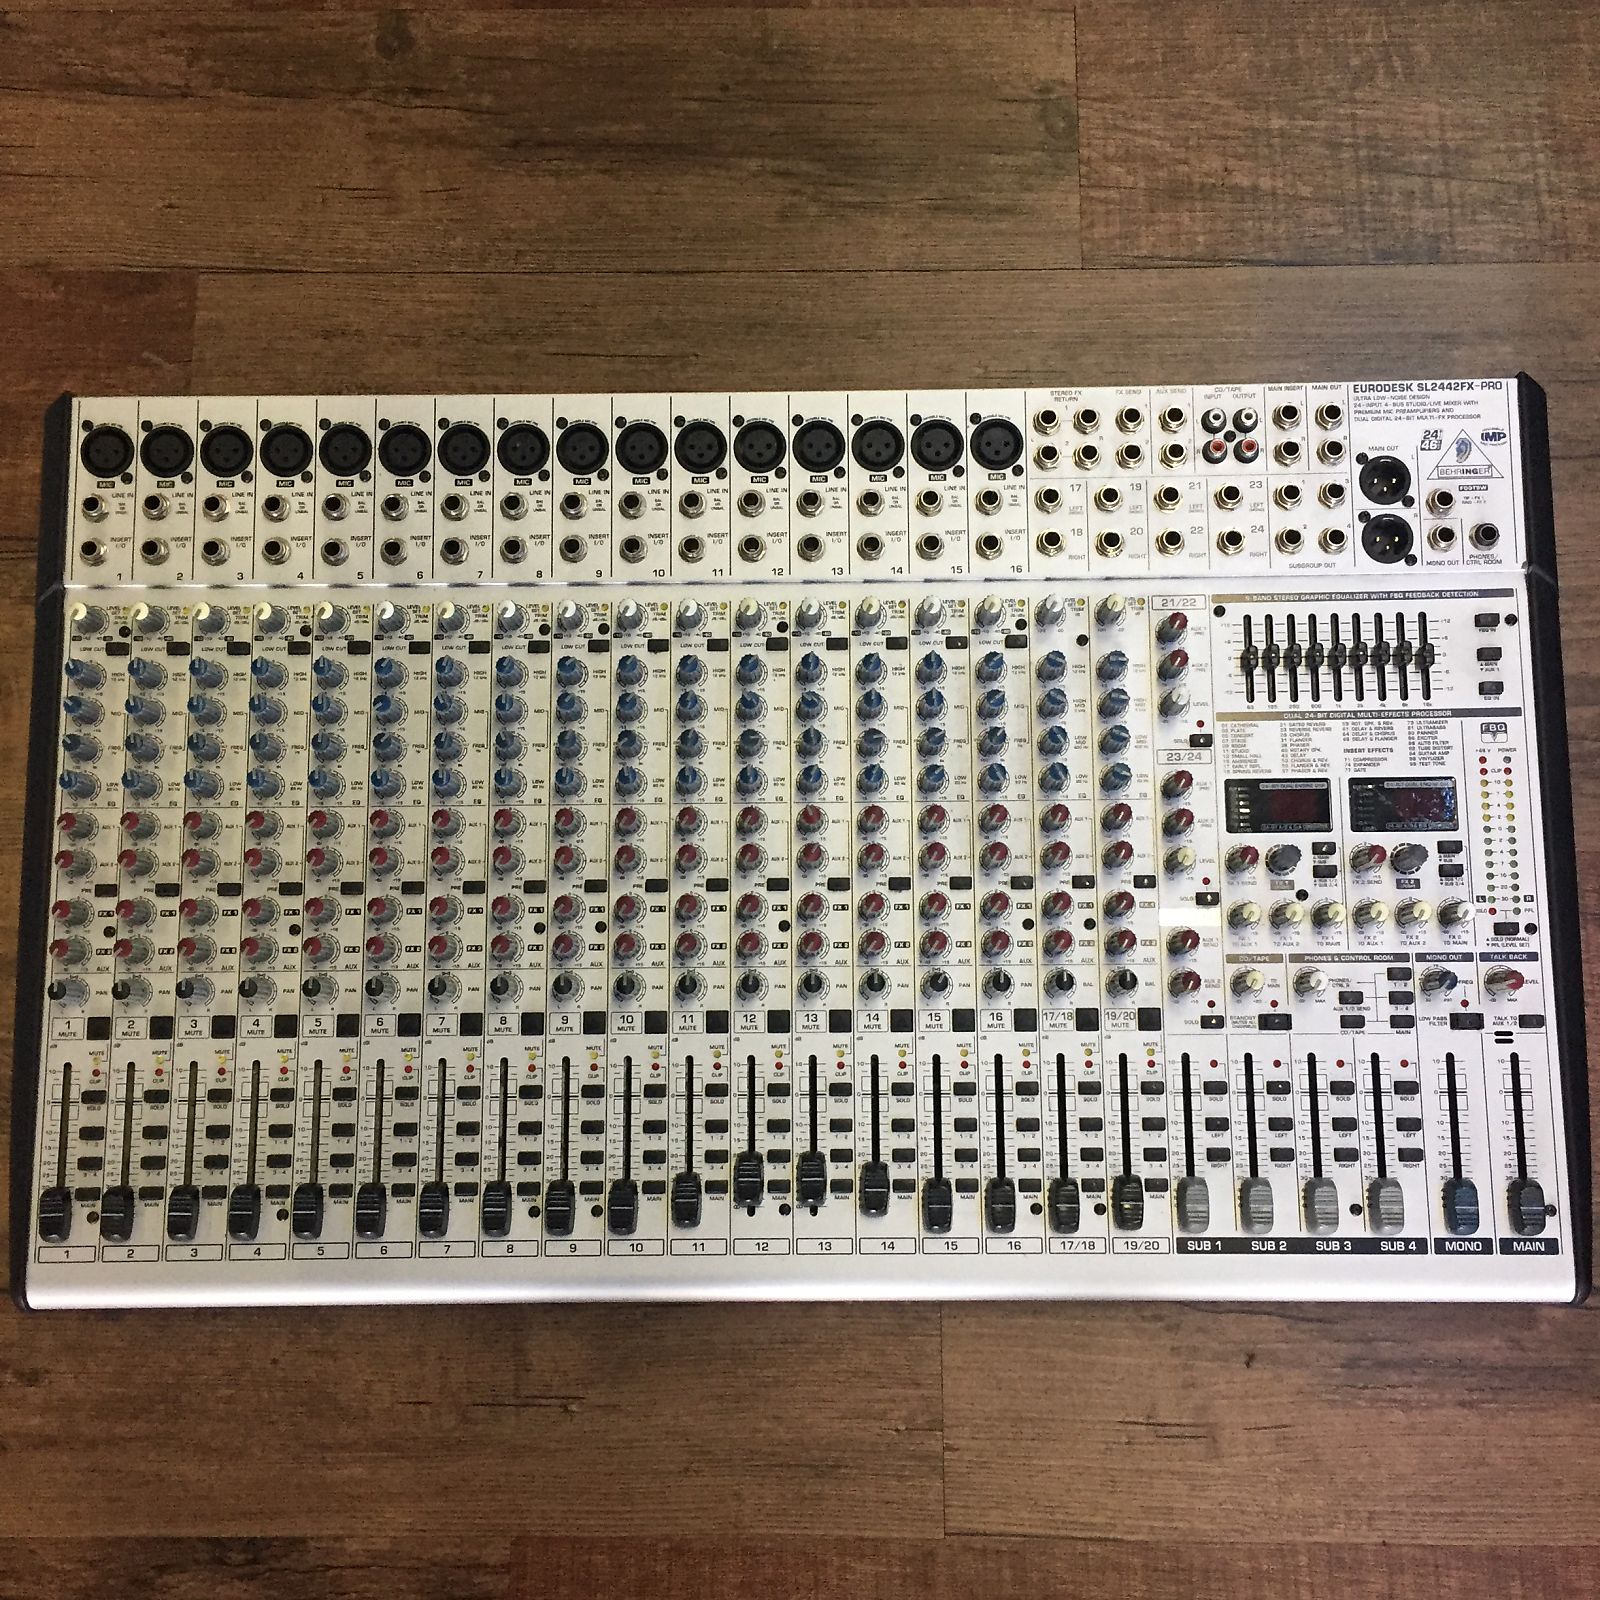 Behringer Eurodesk SL2442FX-Pro 24-Input 4-Bus Mixer with Multi-Effects  Processor | Reverb Canada